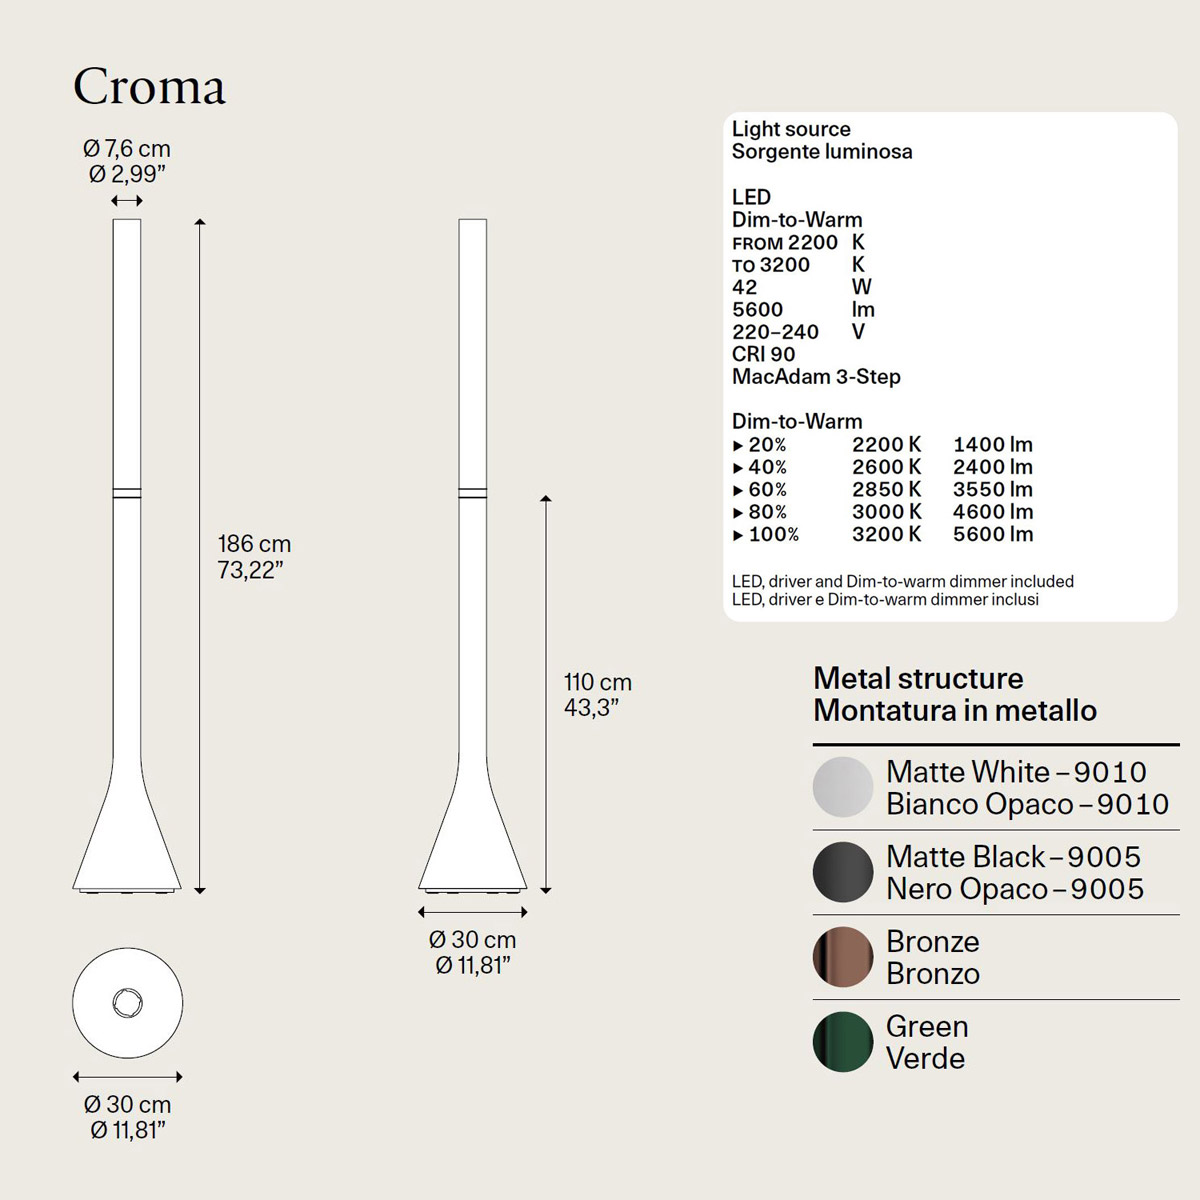 Croma floor light by Lodes